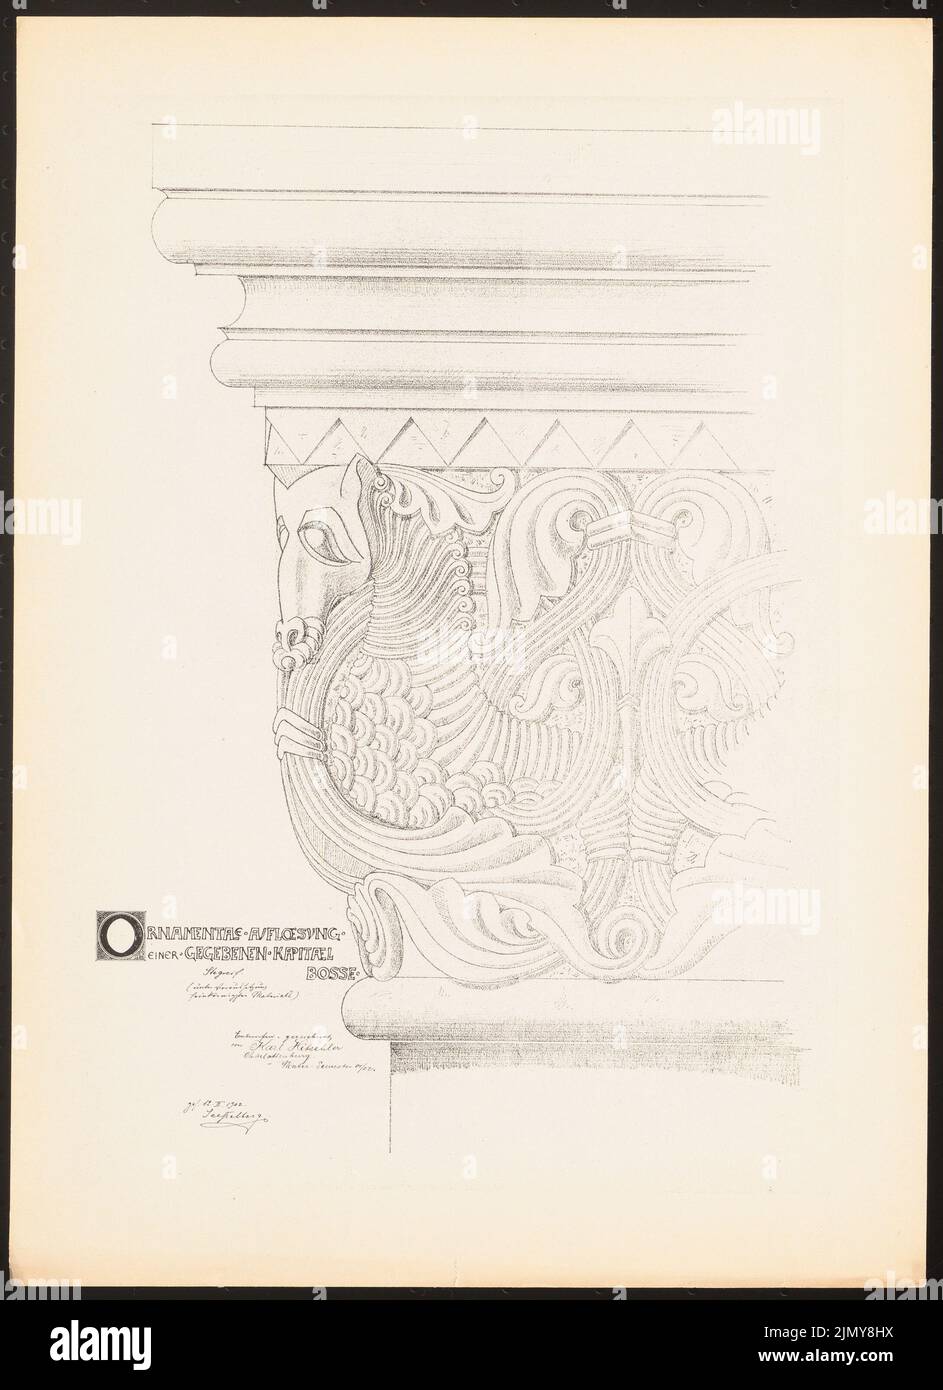 Hitschler Karl, ornamental dissolution of a given chapter boss. (From: Prints of seminar works by the Royal Technical University of Berlin, Vol. II) (12.03.1902): View. Print on paper, 33.9 x 24.6 cm (including scan edges) Stock Photo